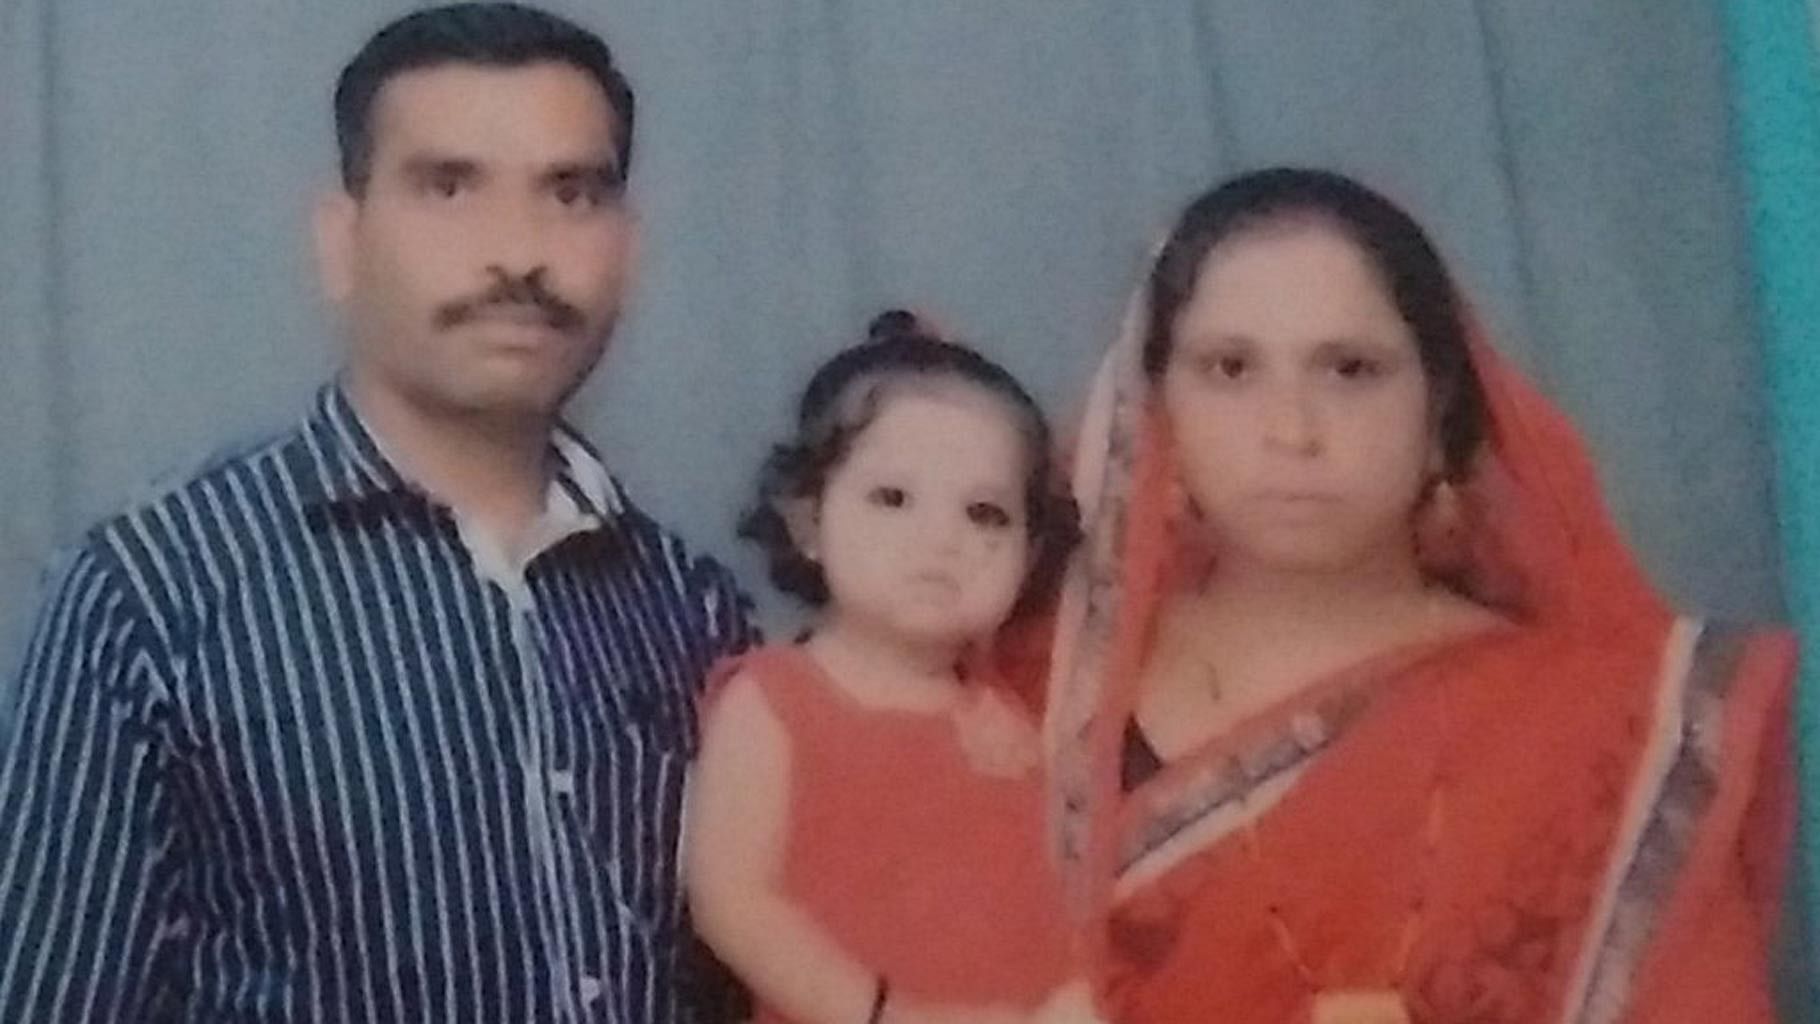 Naik Rajput with his wife and a 2-yr-old daughter. (Photo Courtesy: Twitter/<a href="https://twitter.com/jrpur">@jrpur</a>)